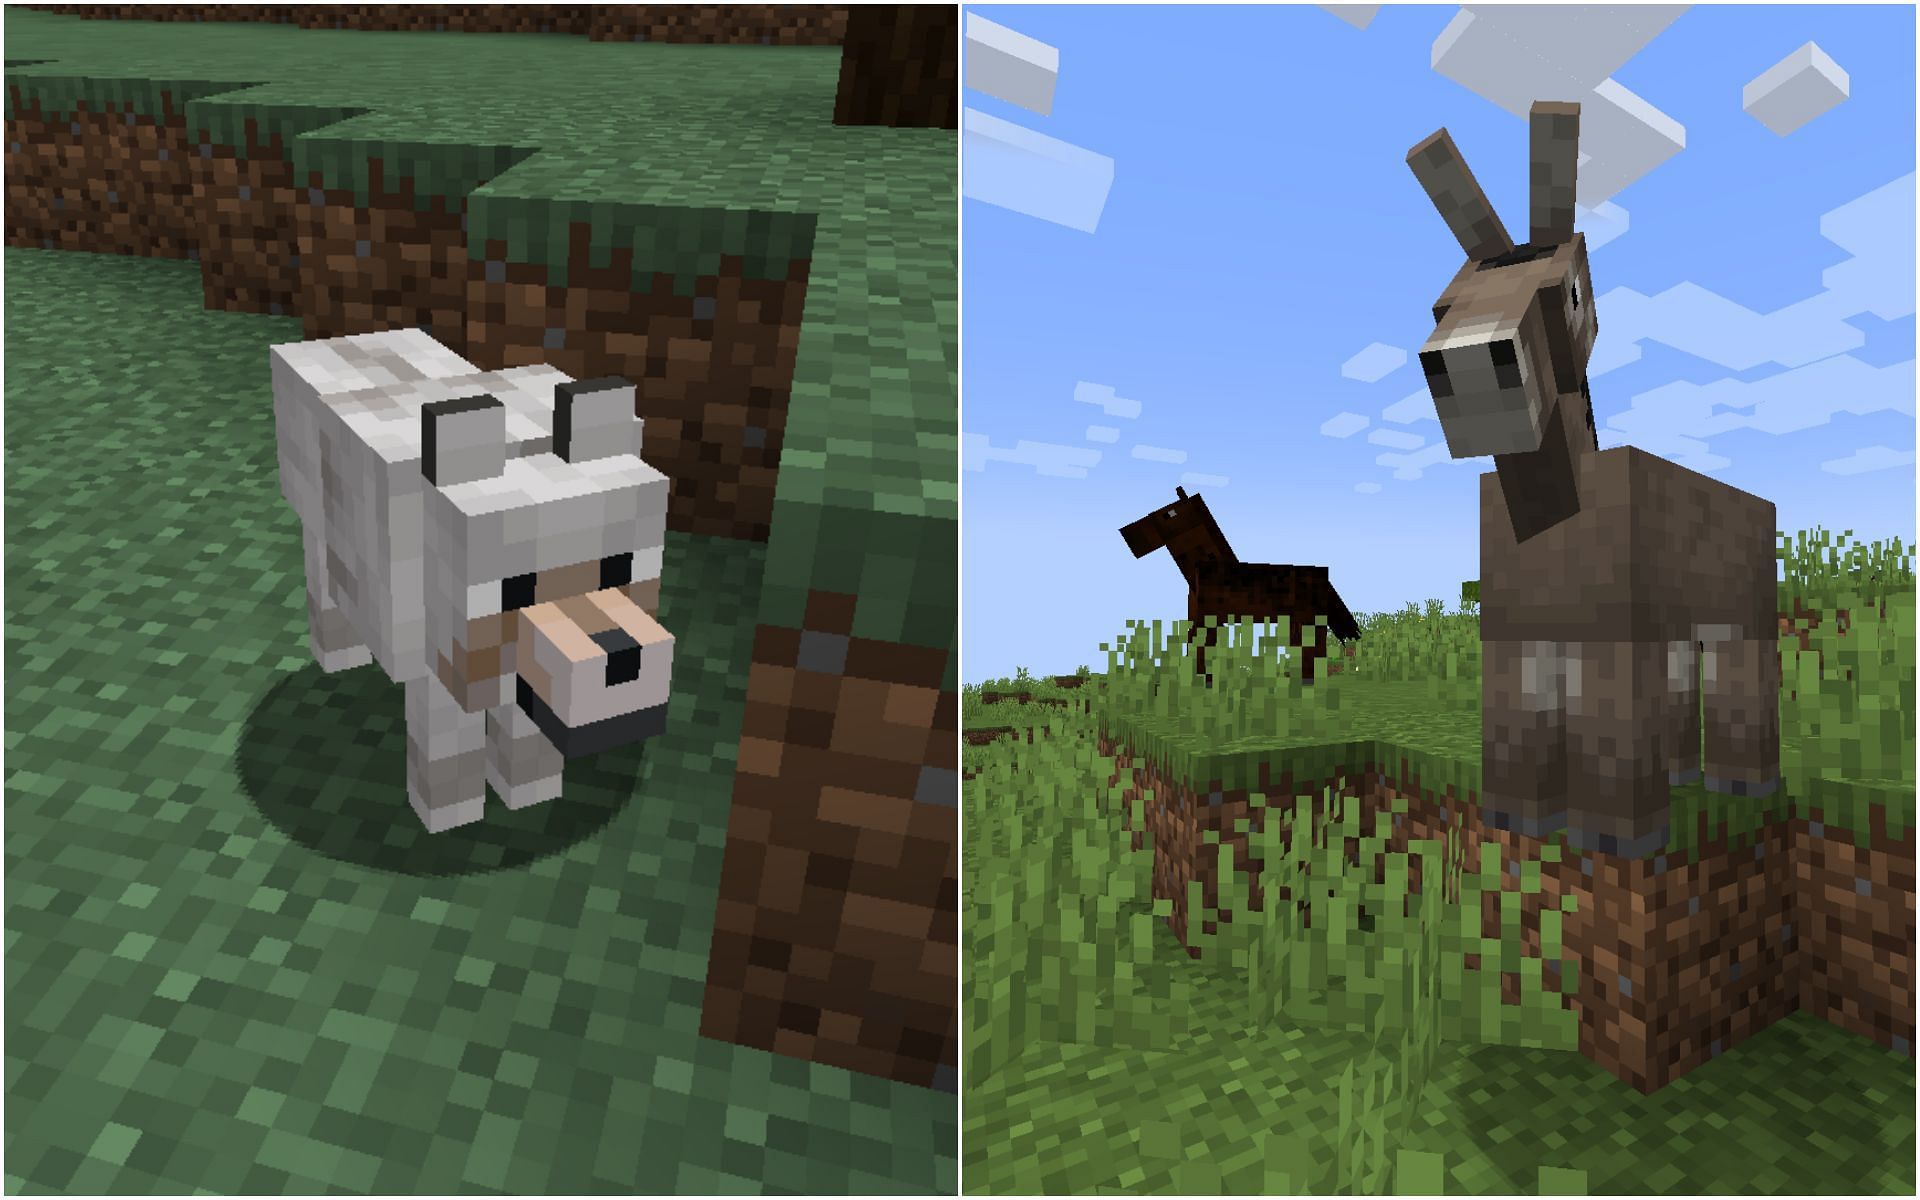 Nearly all passive mobs are friendly in Minecraft (Image via Sportskeeda)